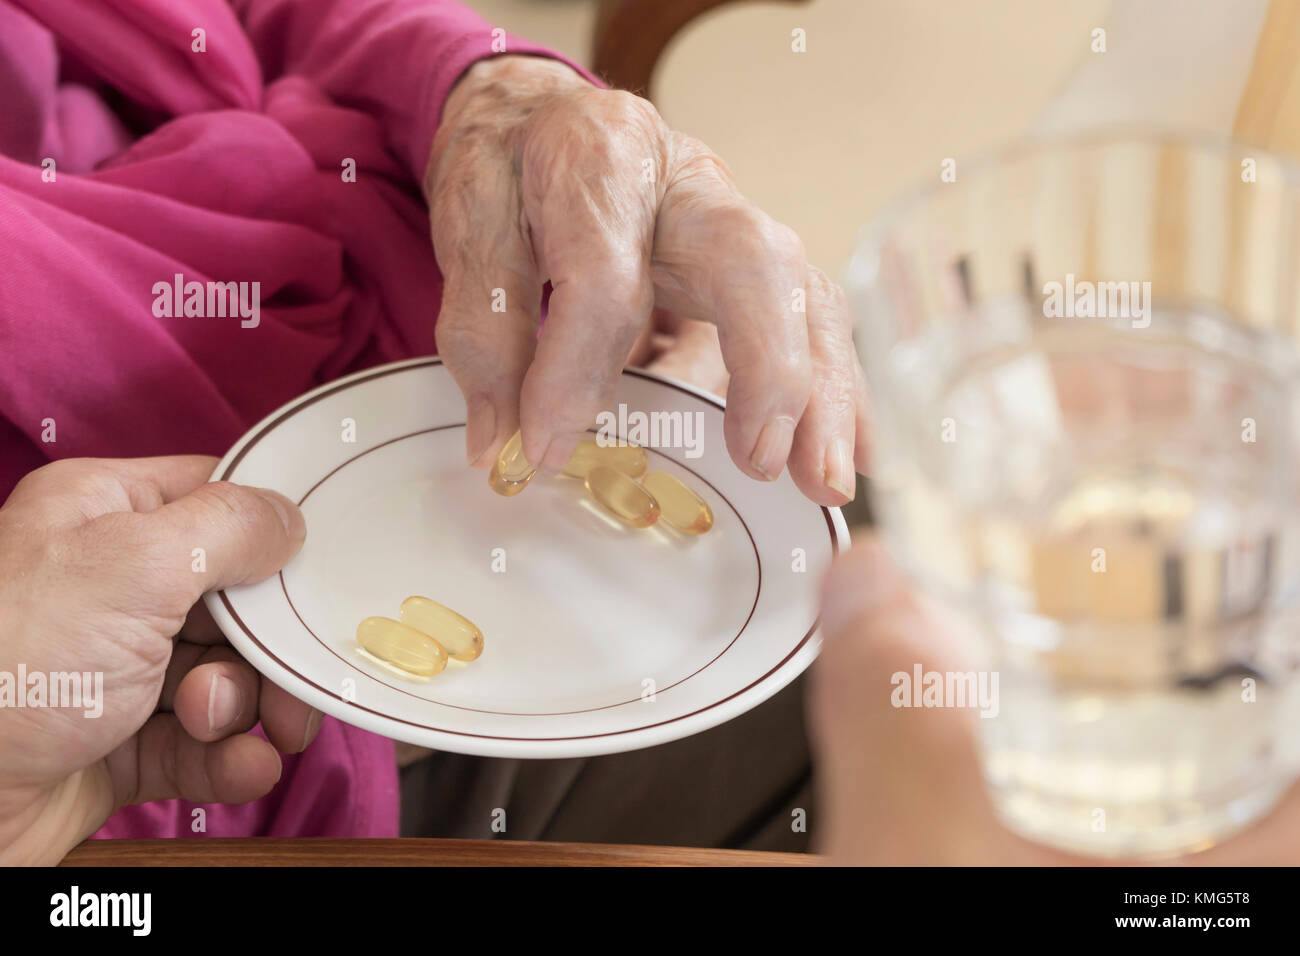 Caretaker giving medicine to senior woman at rest home Stock Photo